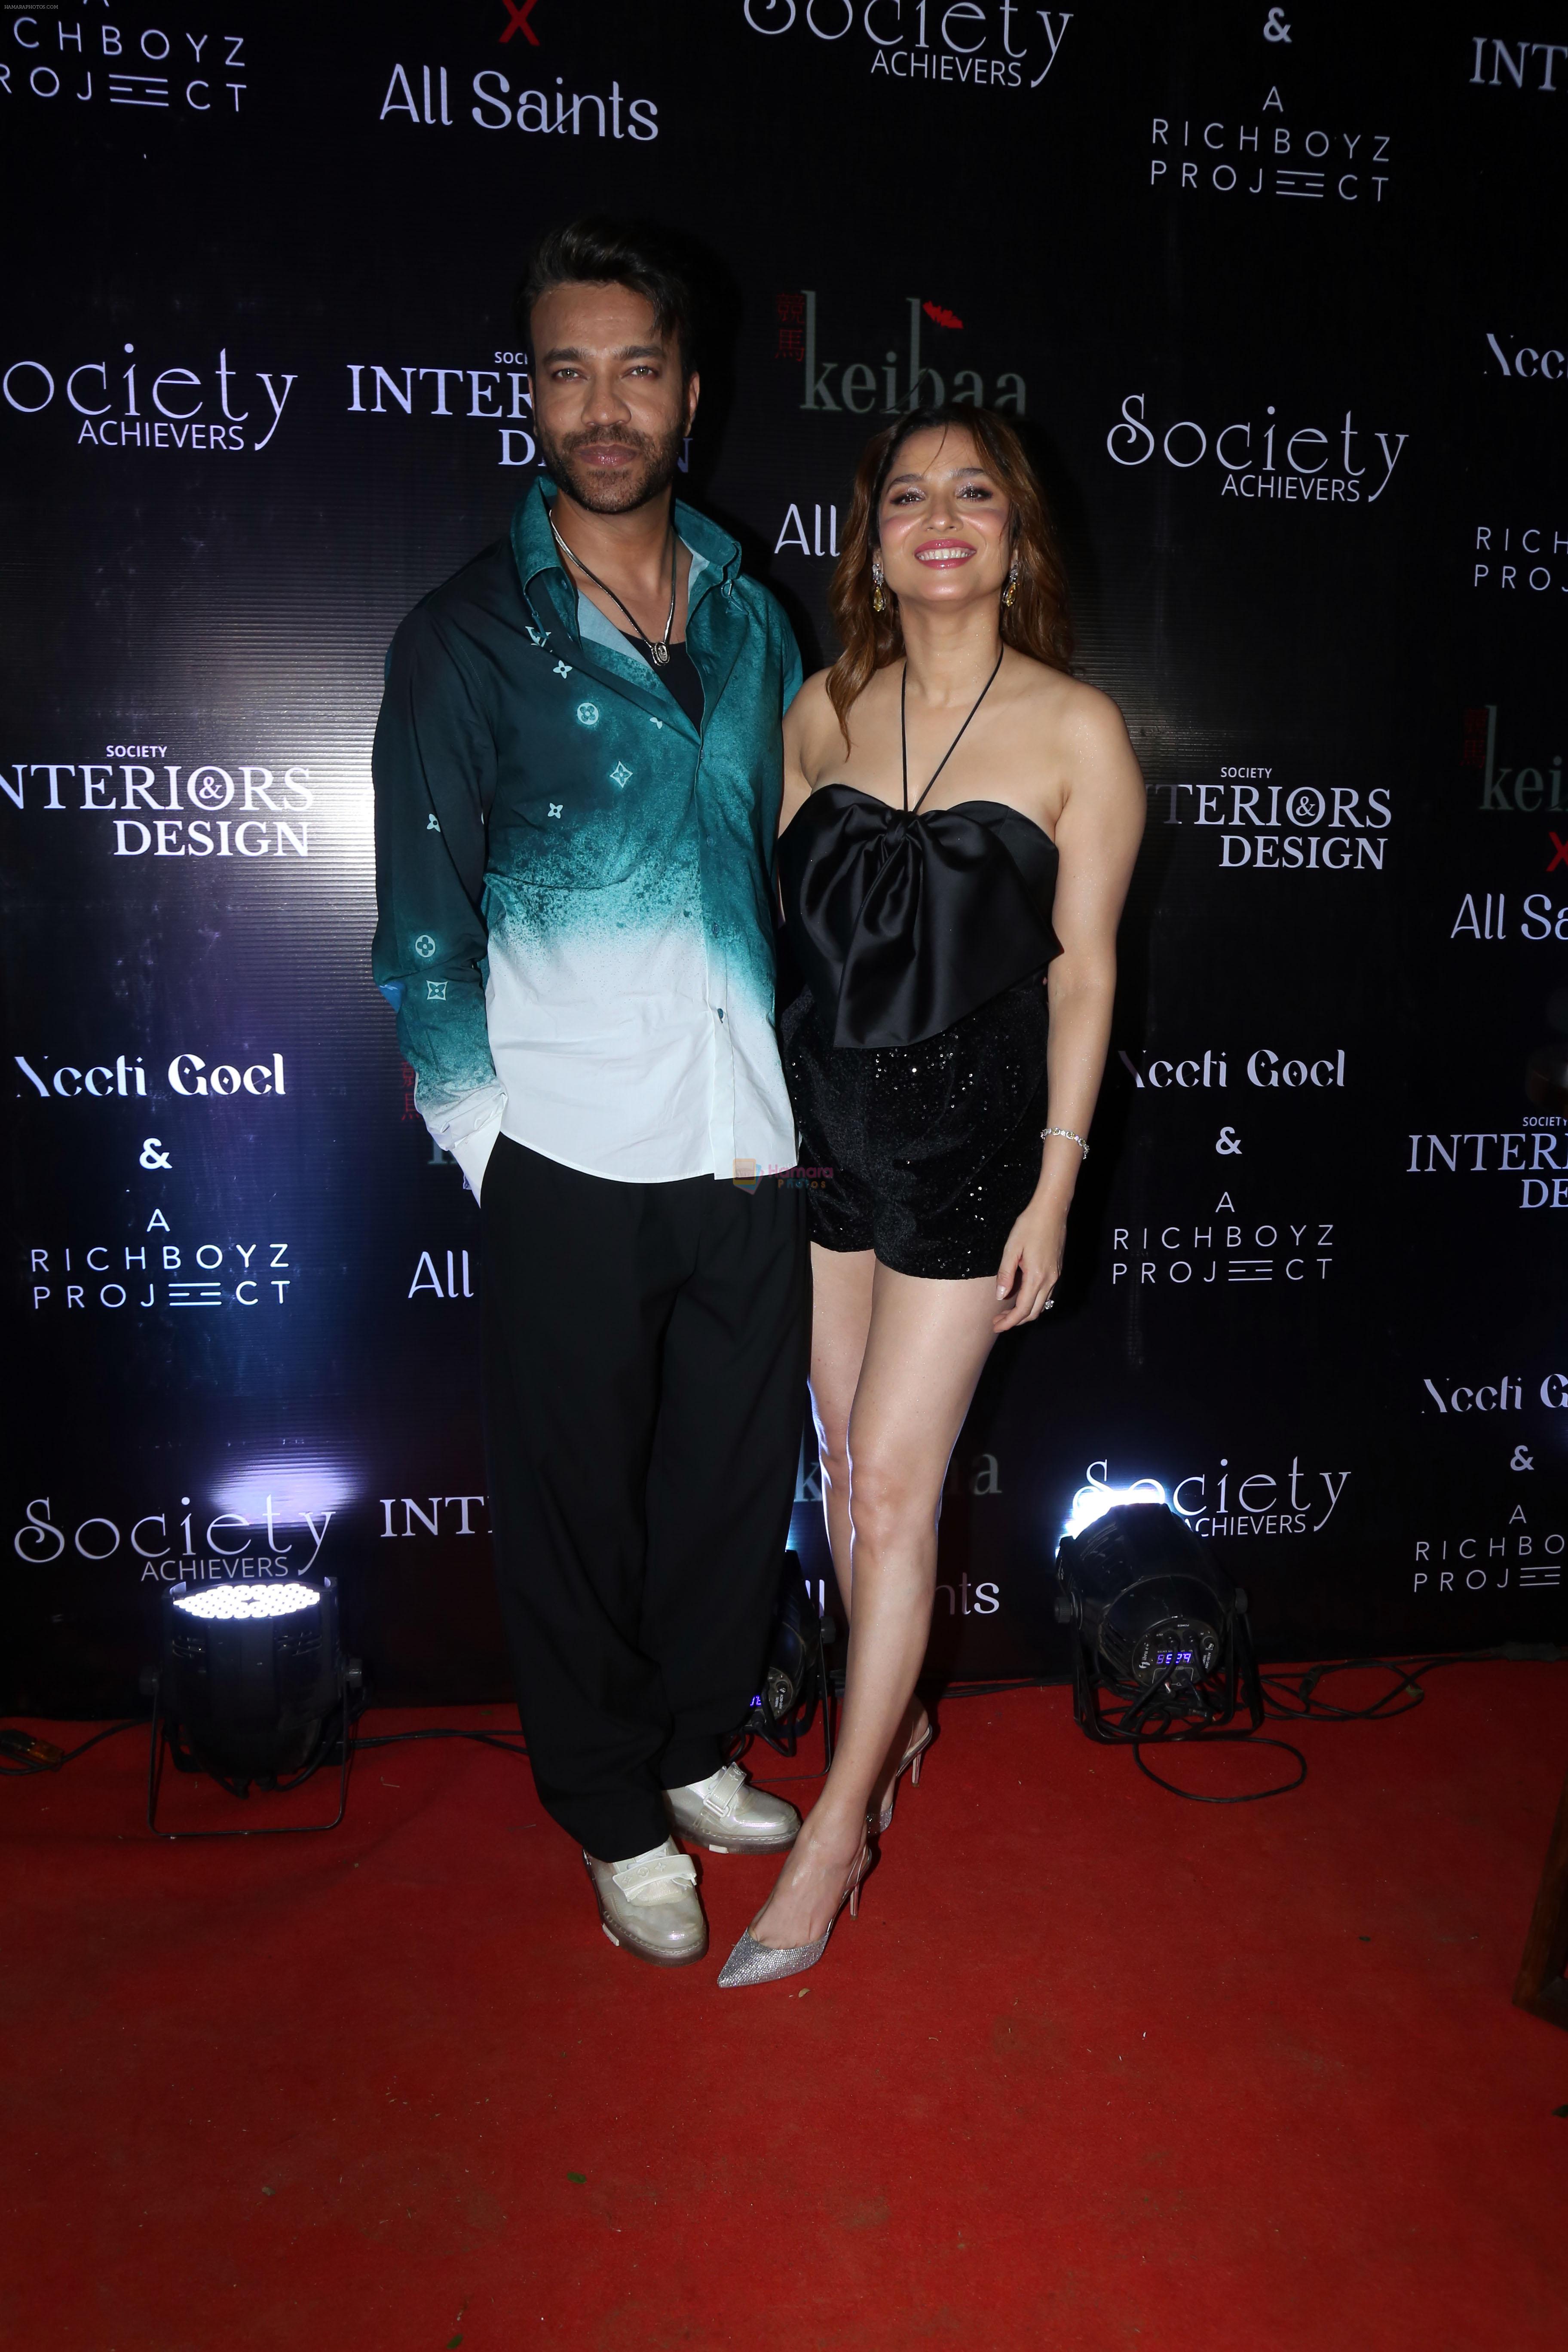 Ankita Lokhande with spouse Vicky Jain at the ReOpening of Keibaa X All Saints and Celebration of Society Achievers and Society Interiors and Design Magazine